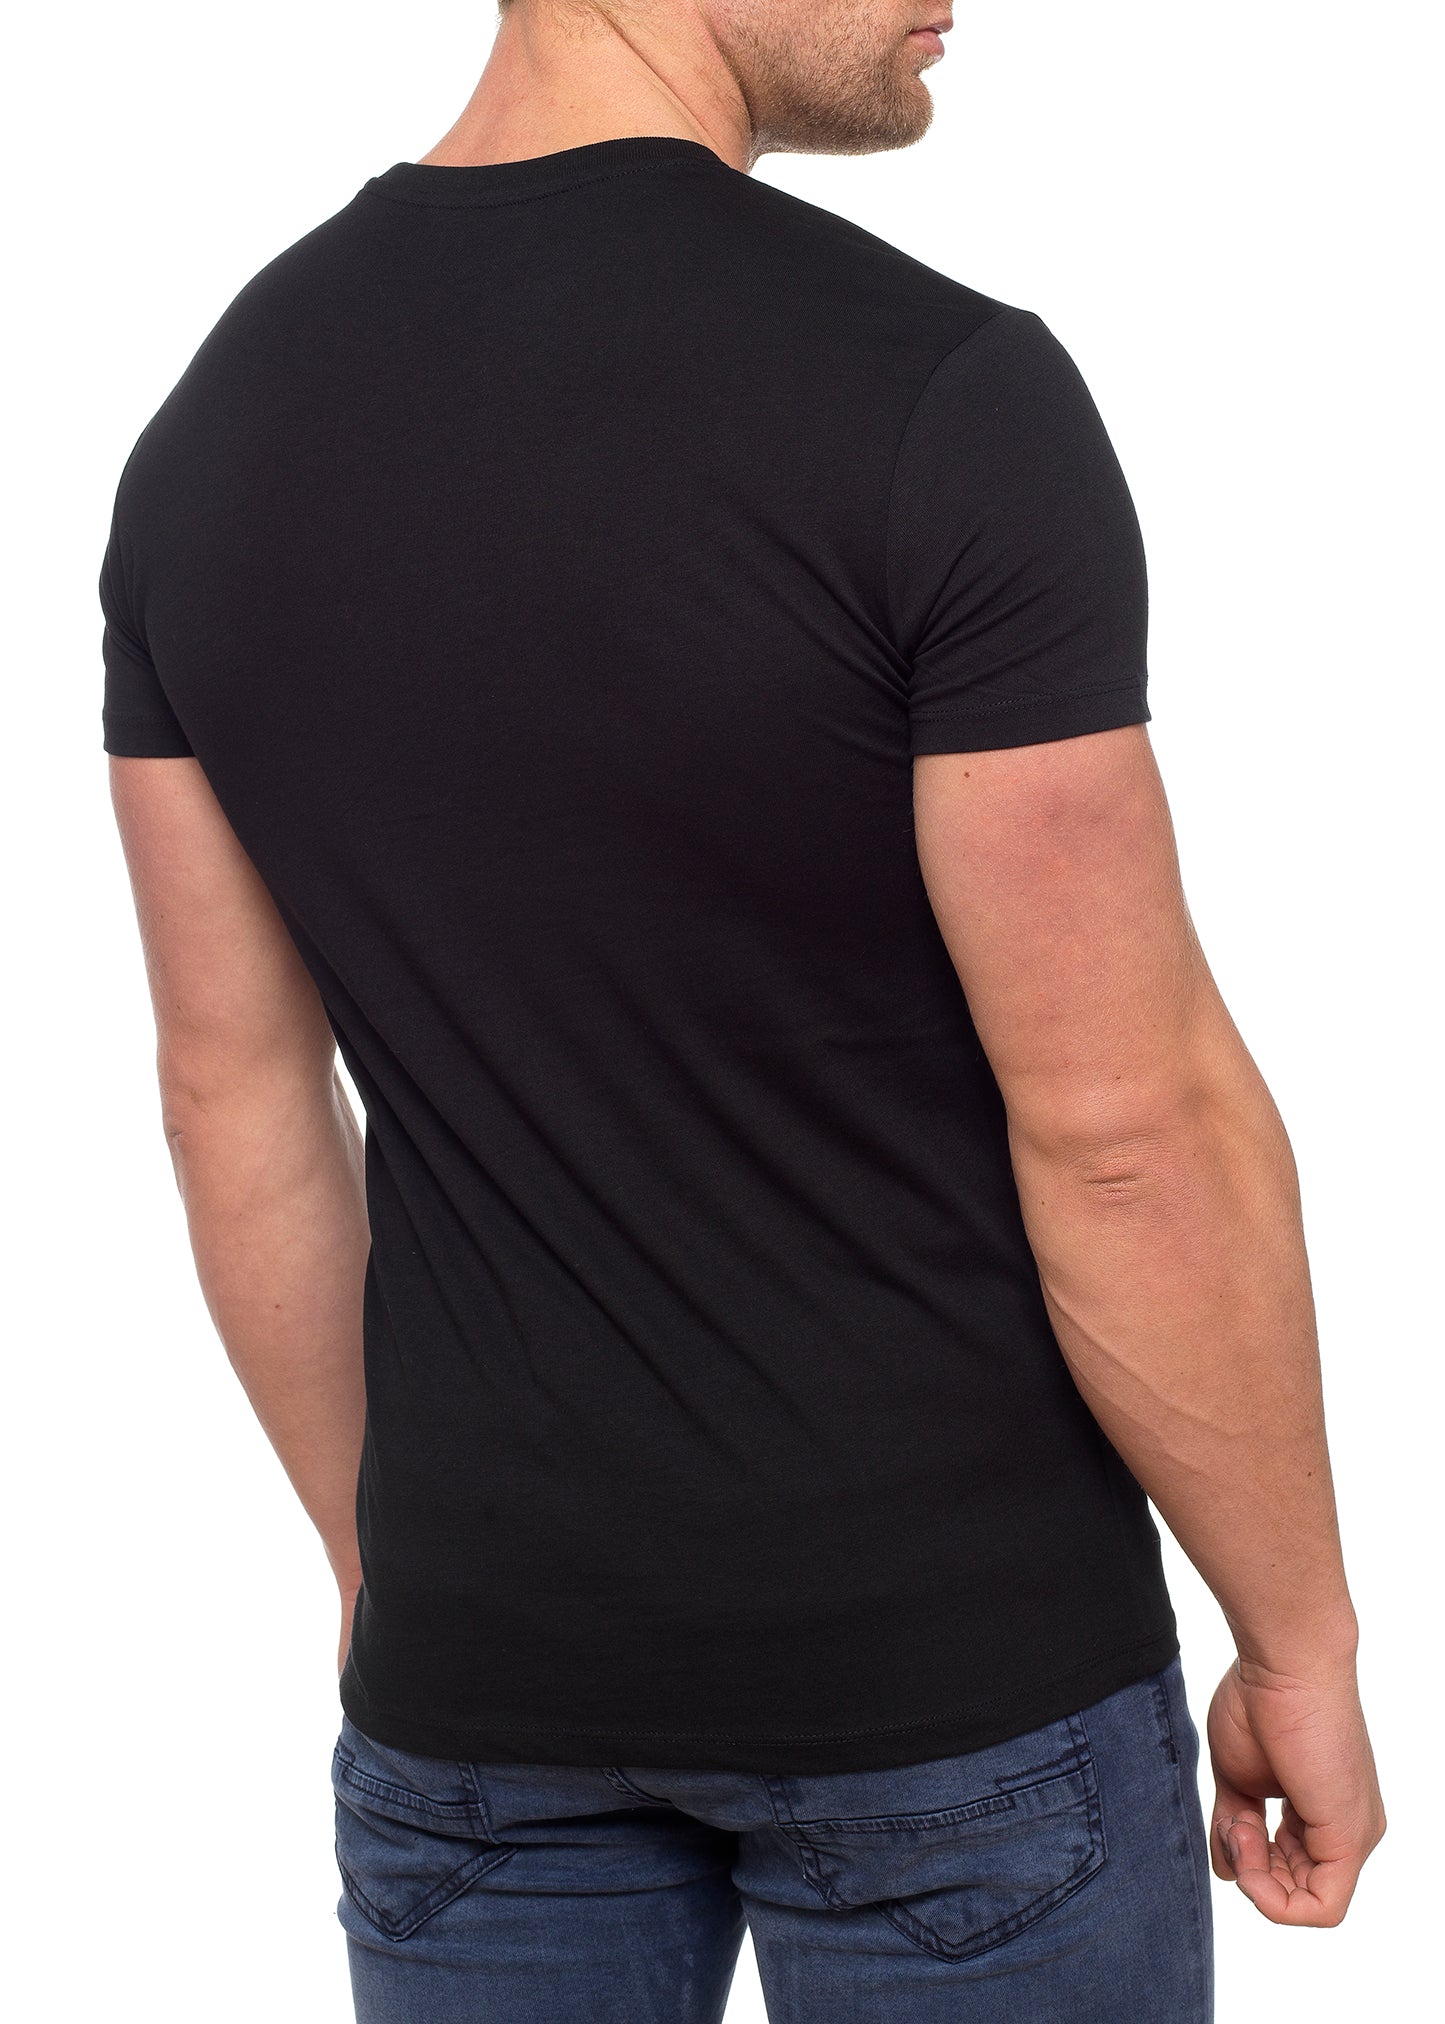 Mens Muscle Fit T Shirt